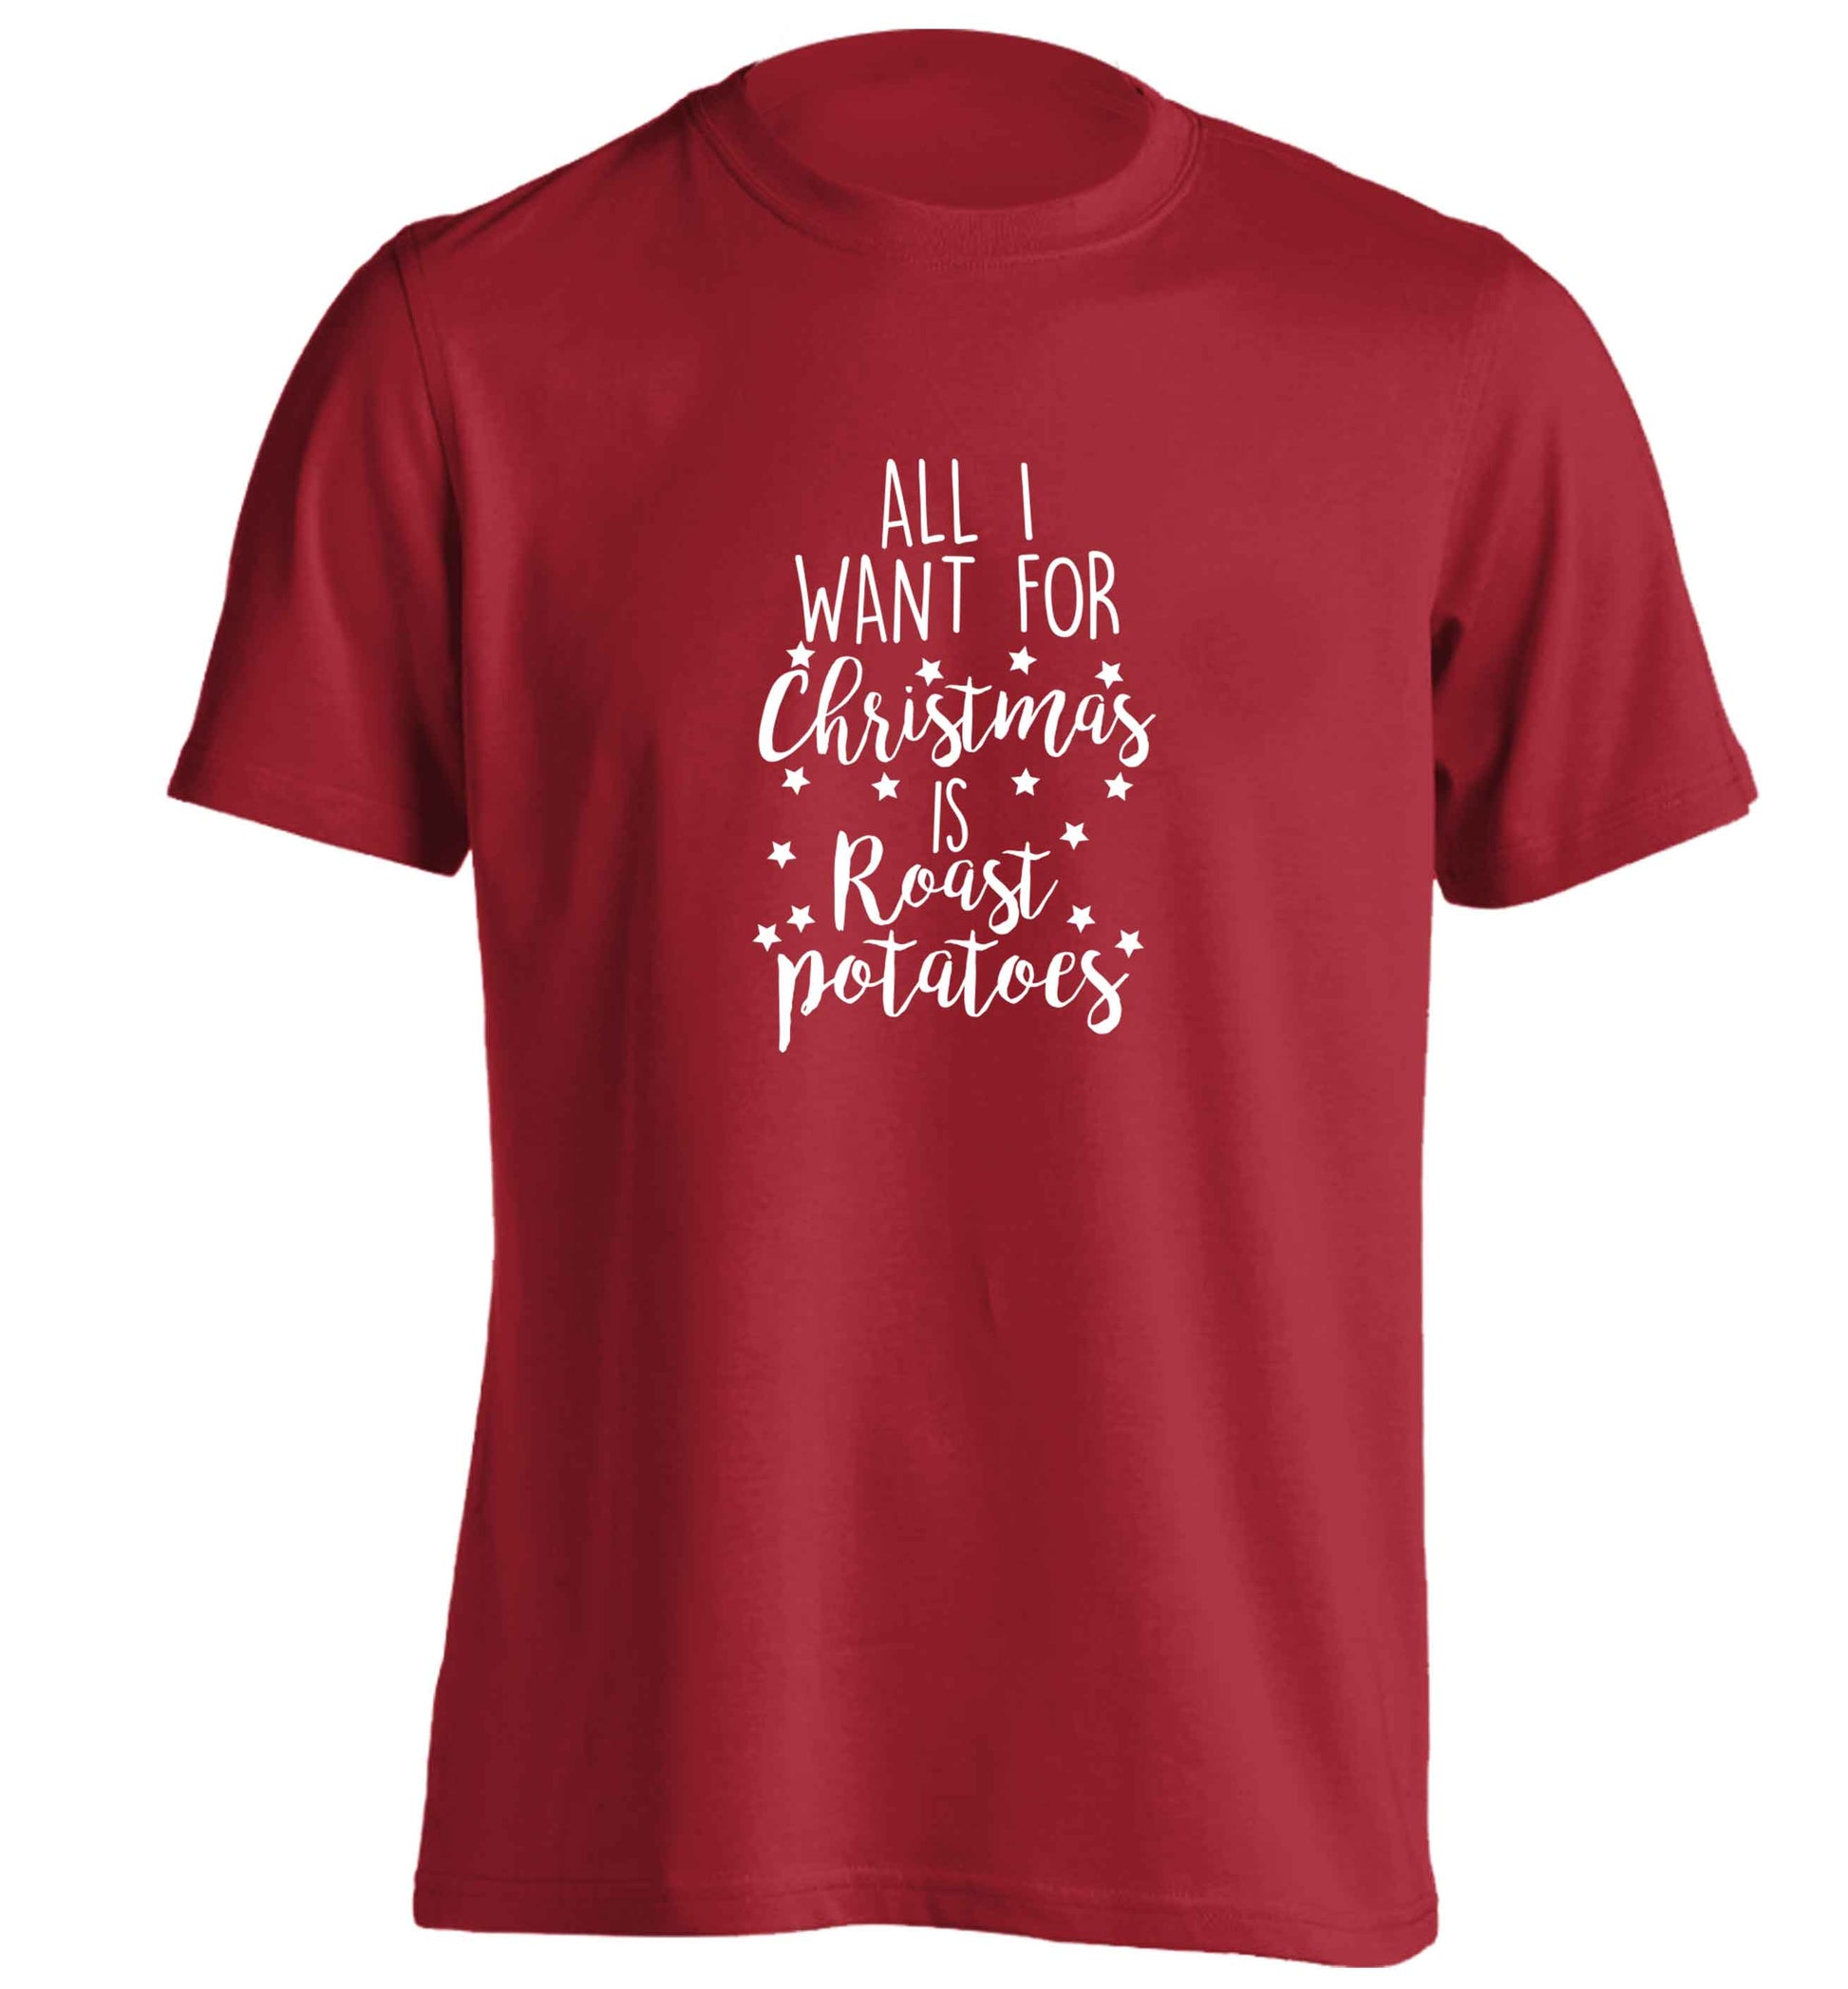 All I want for Christmas is roast potatoes adults unisex red Tshirt 2XL